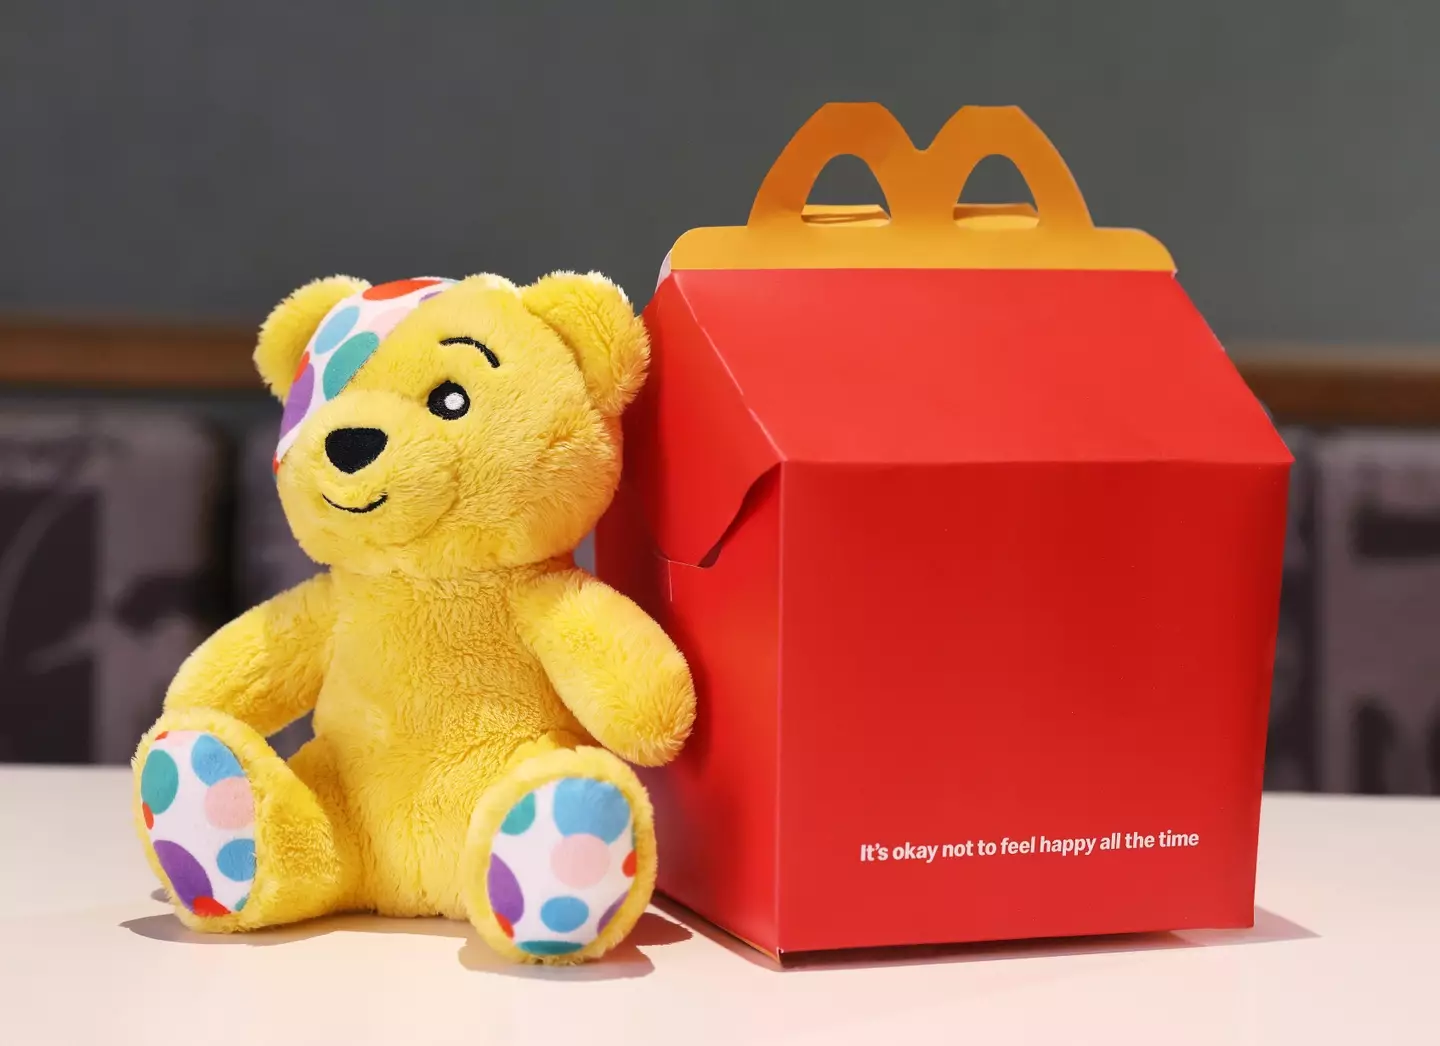 The Happy Meal box design has been changed this week, with some help from Children in Need. (McDonald's)